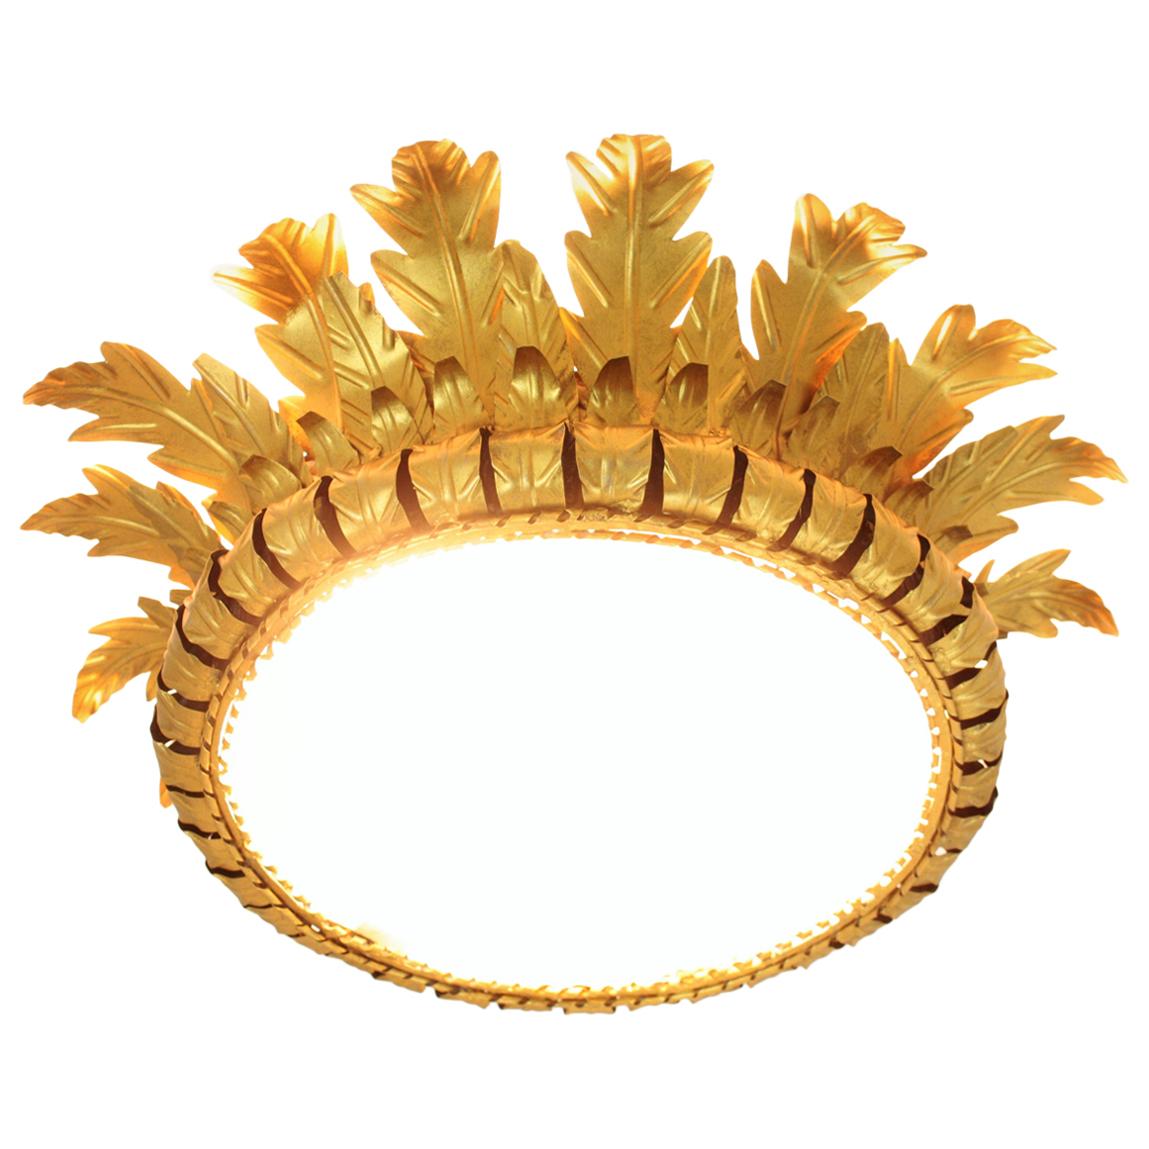 Sunburst Crown Large Ceiling Light Fixture in Gilt Metal and Frosted Glass